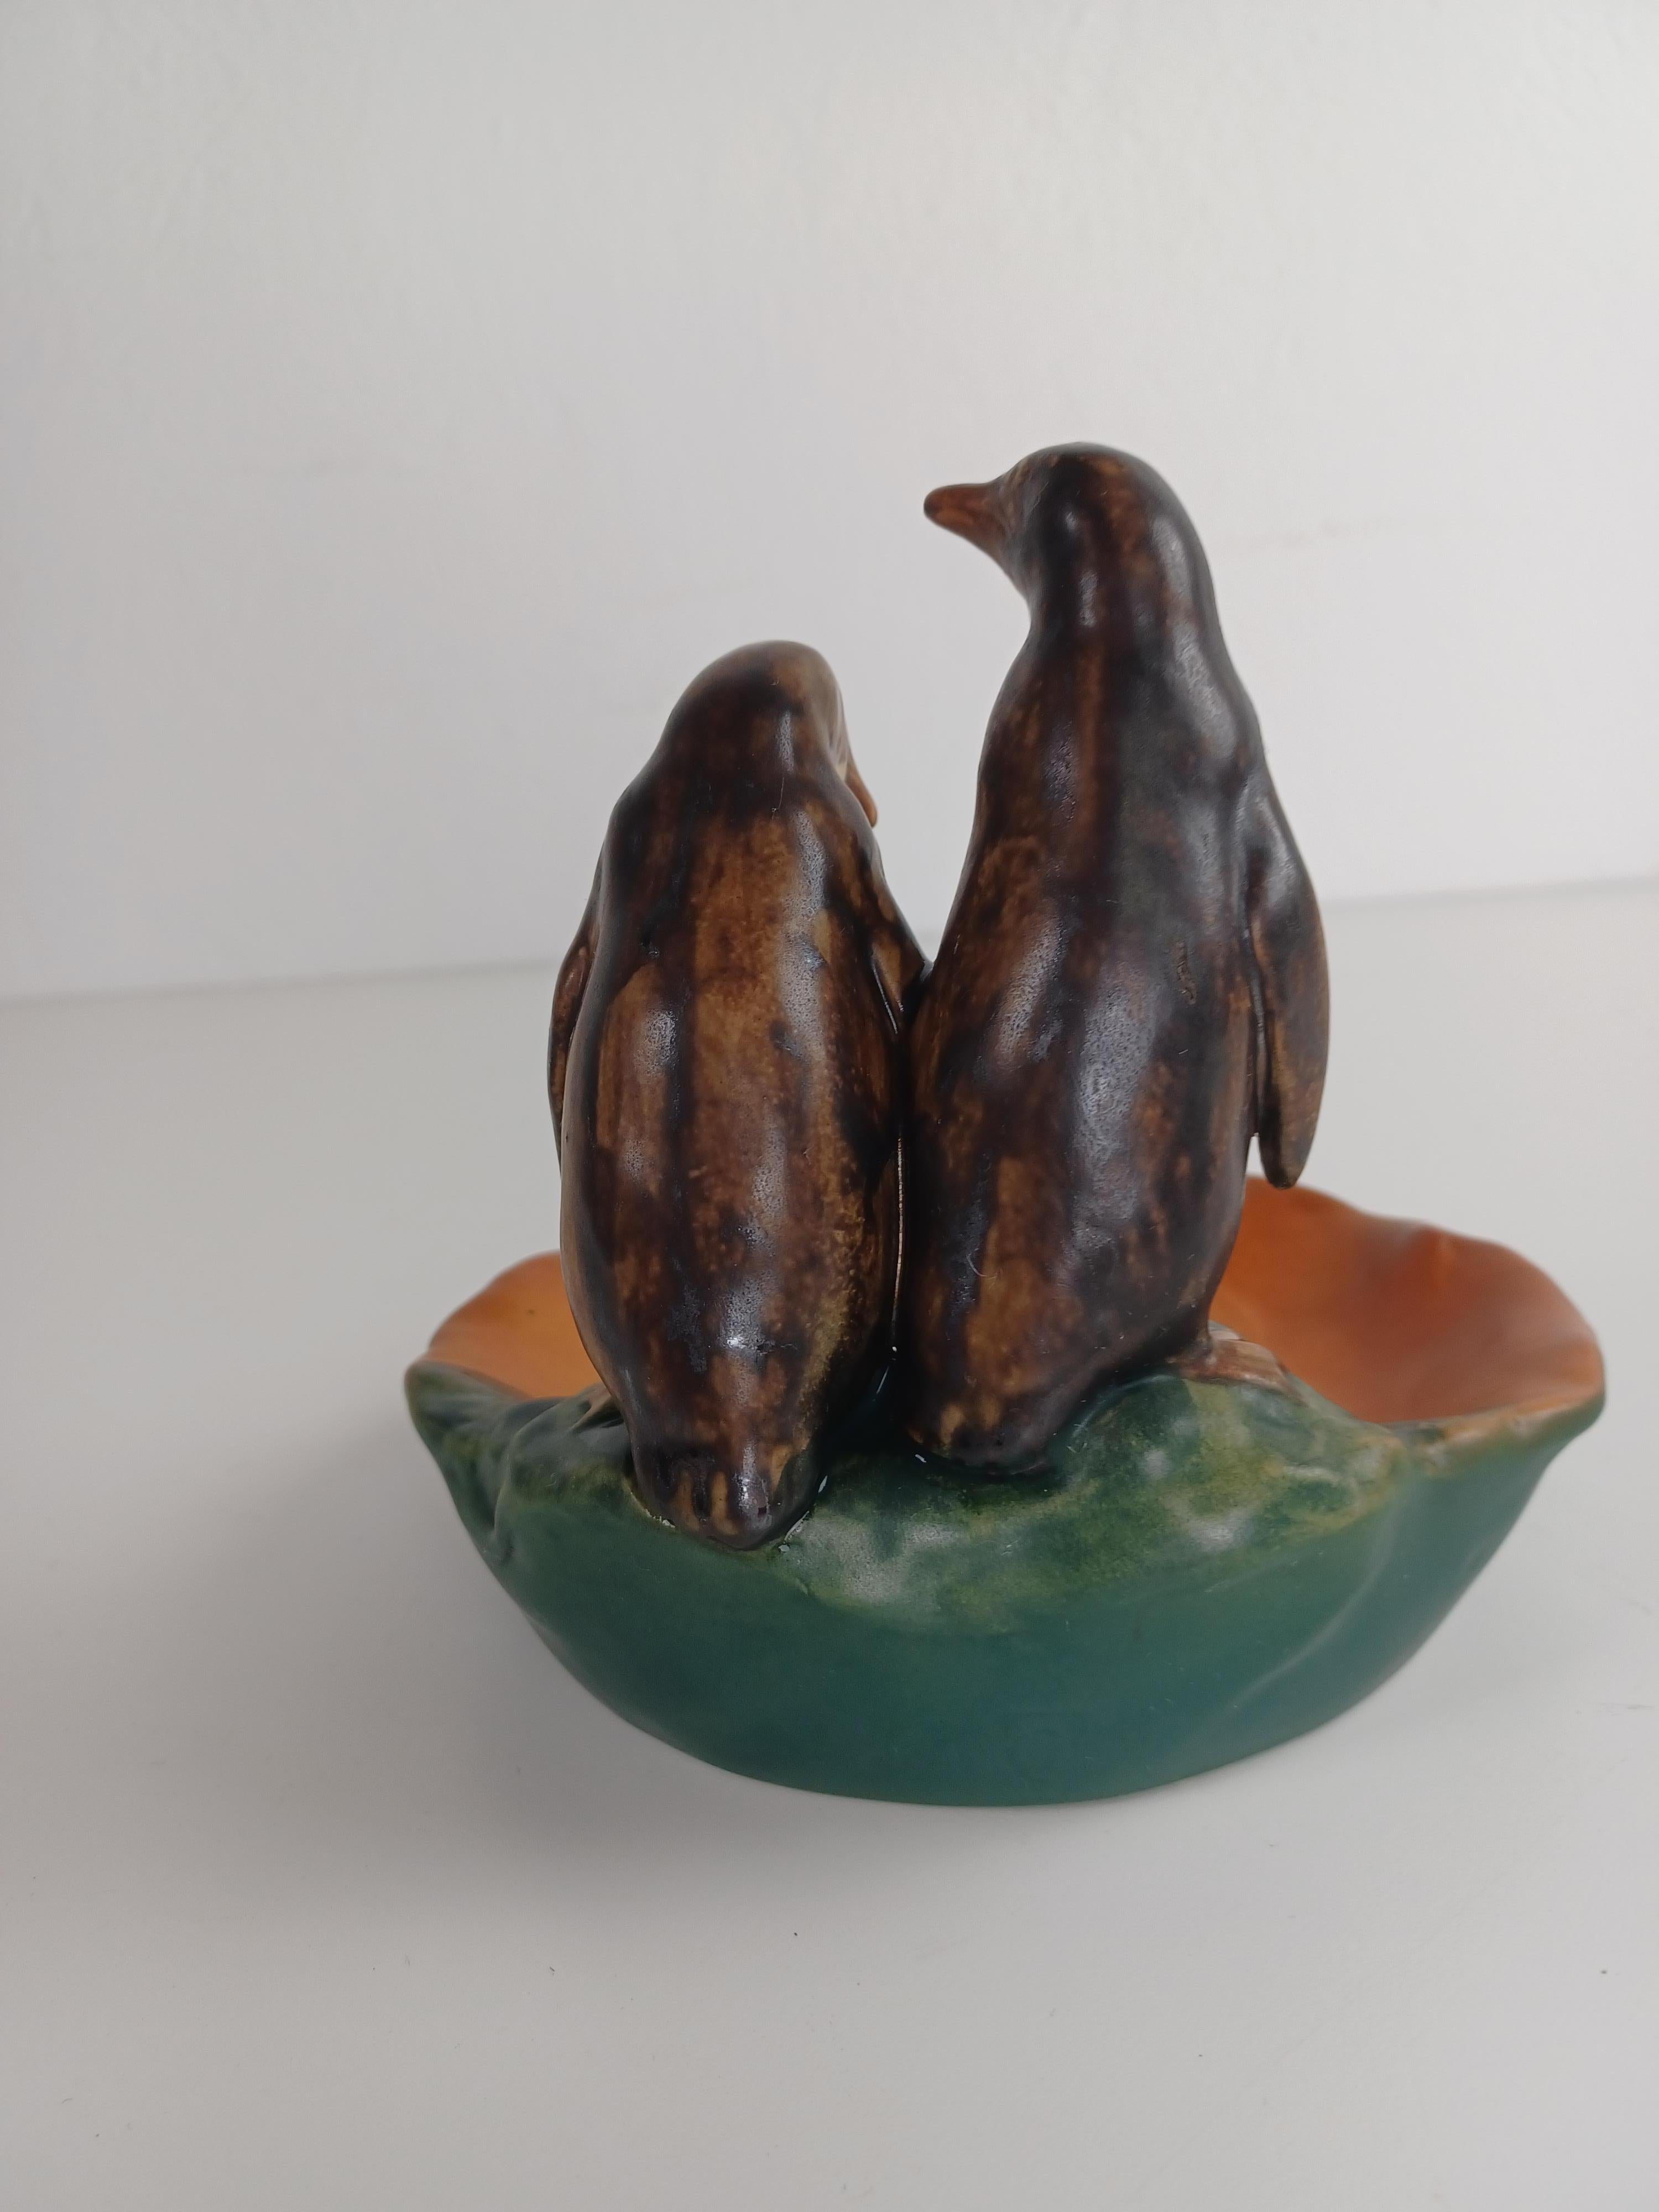 Early 20th Century 1920's Danish Hand-Crafted Art Nouveau Penguin Ash Tray / Bowl by P. Ipsens Enke For Sale